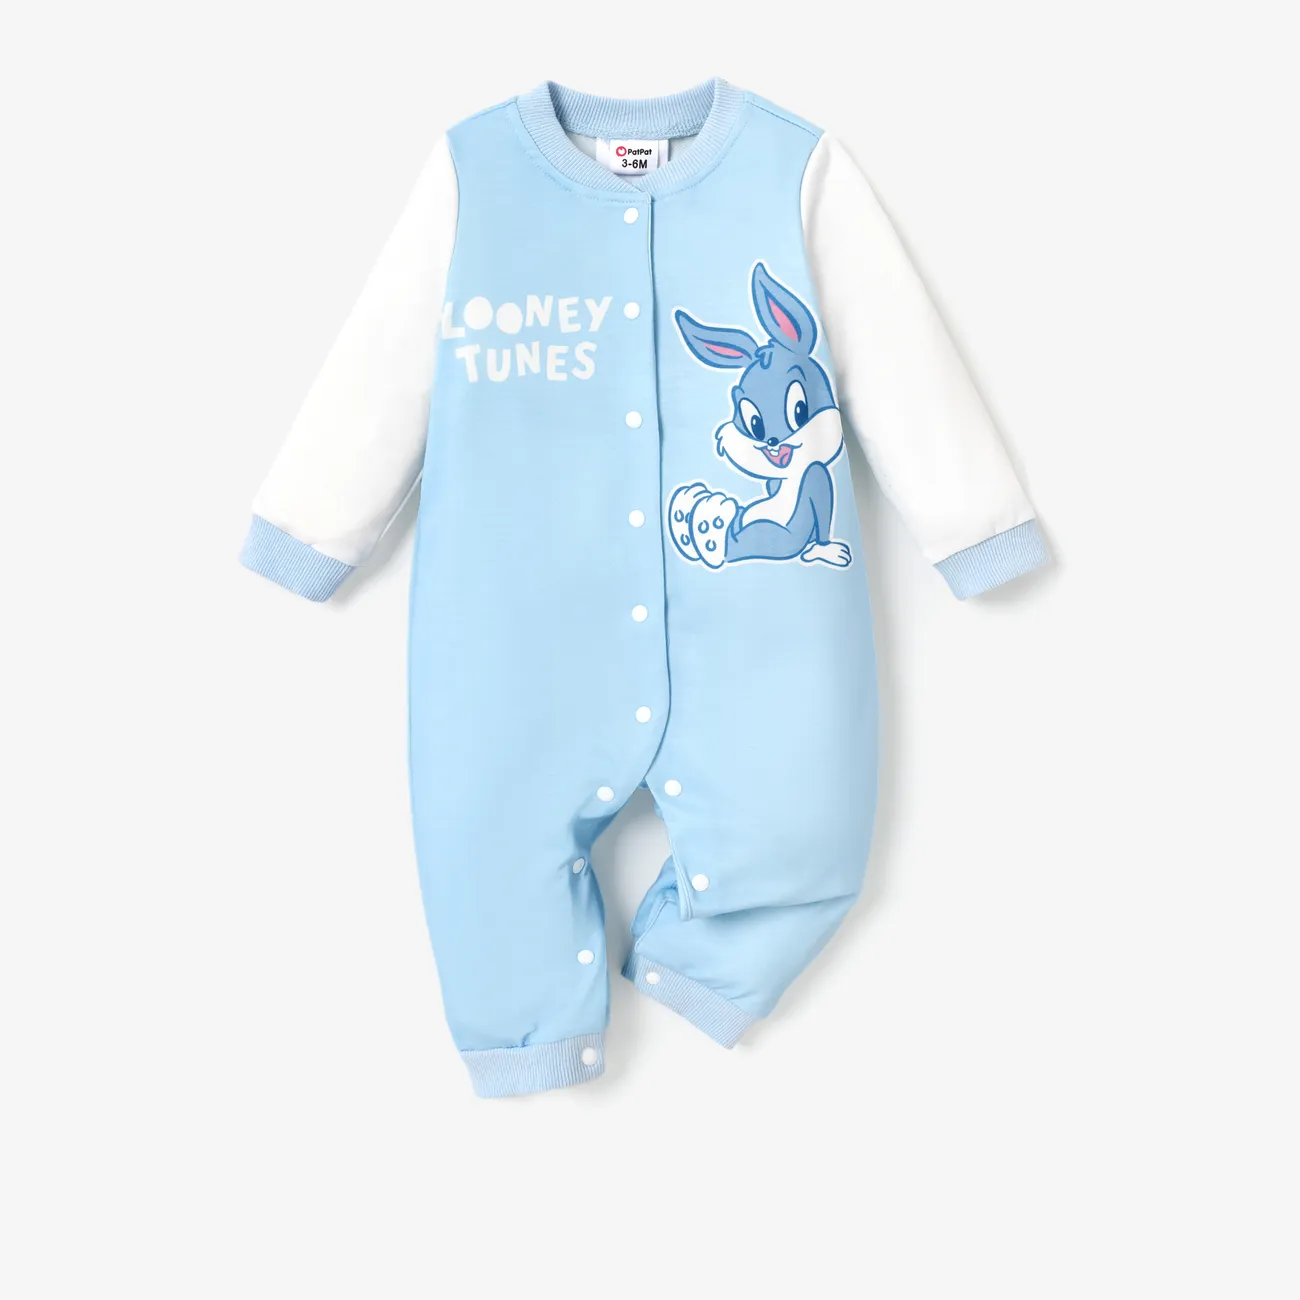 Looney Tunes Baby Boy/Girl Contrast Color Positioning Printed Romper Blue big image 1